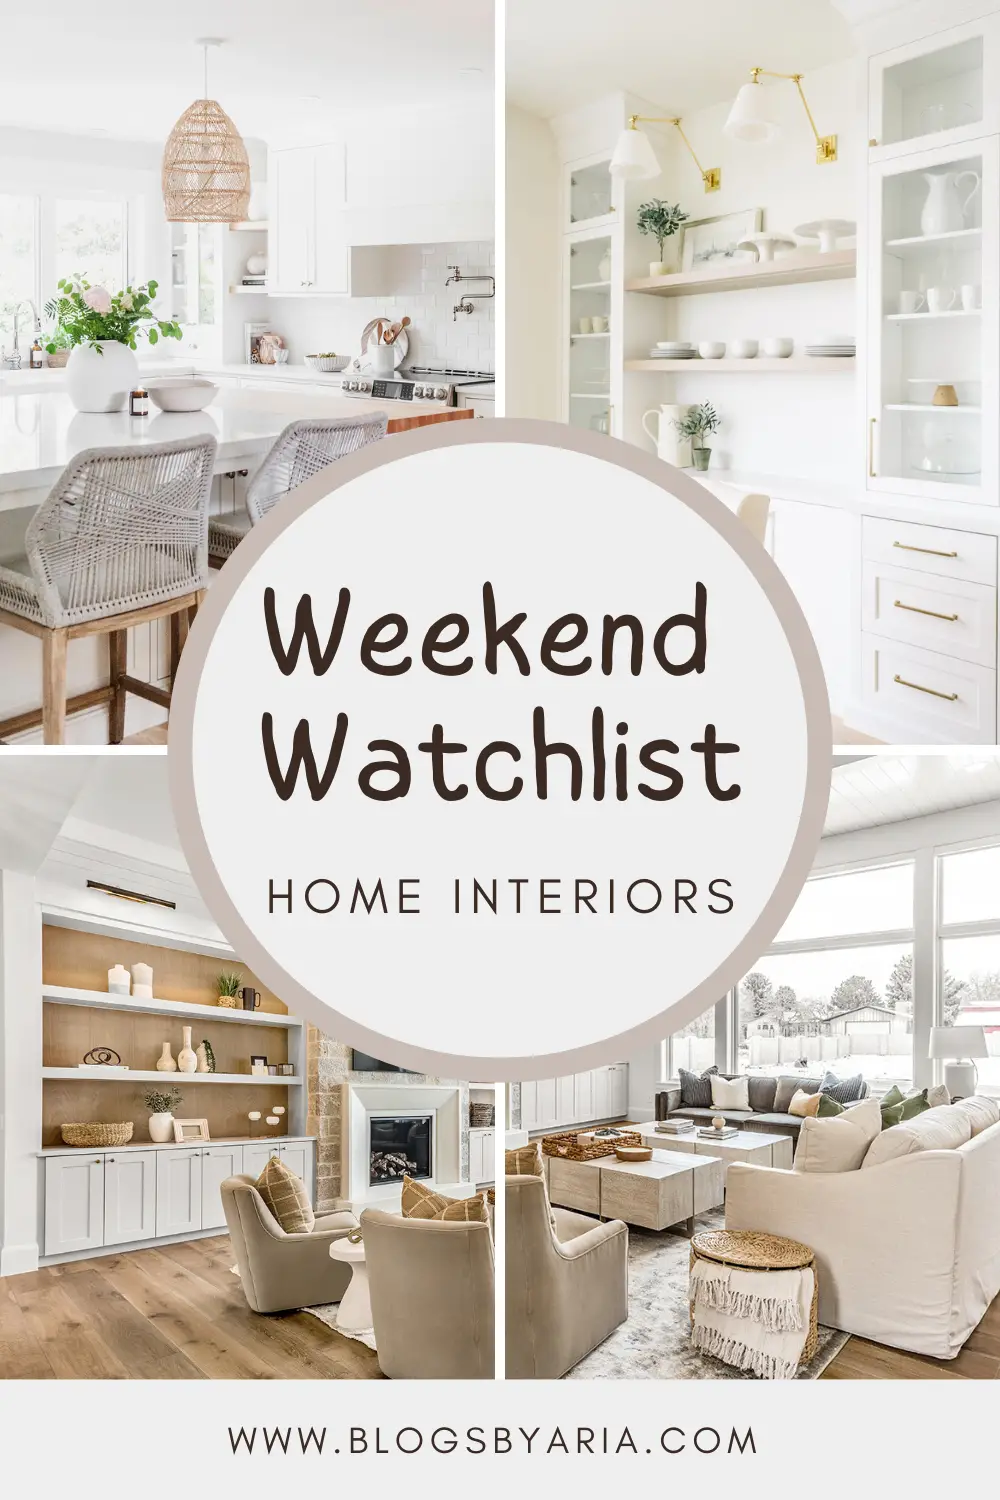 weekend watchlist favorite spaces of the week home interiors inspo interior design ideas